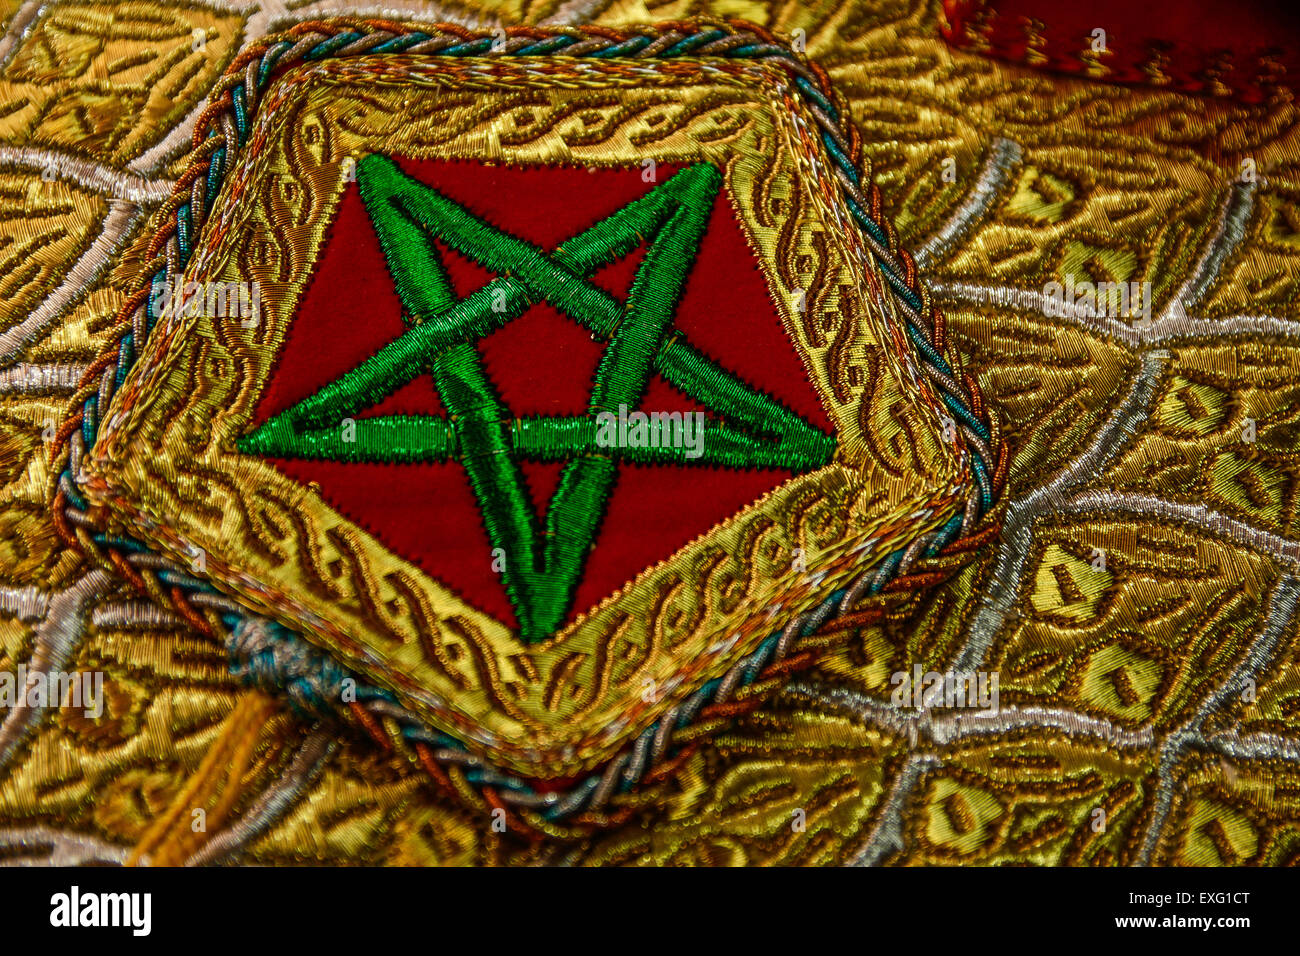 Moroccan Flag Embroidery in Red and Green with Intricate Gold Thread Designs Stock Photo